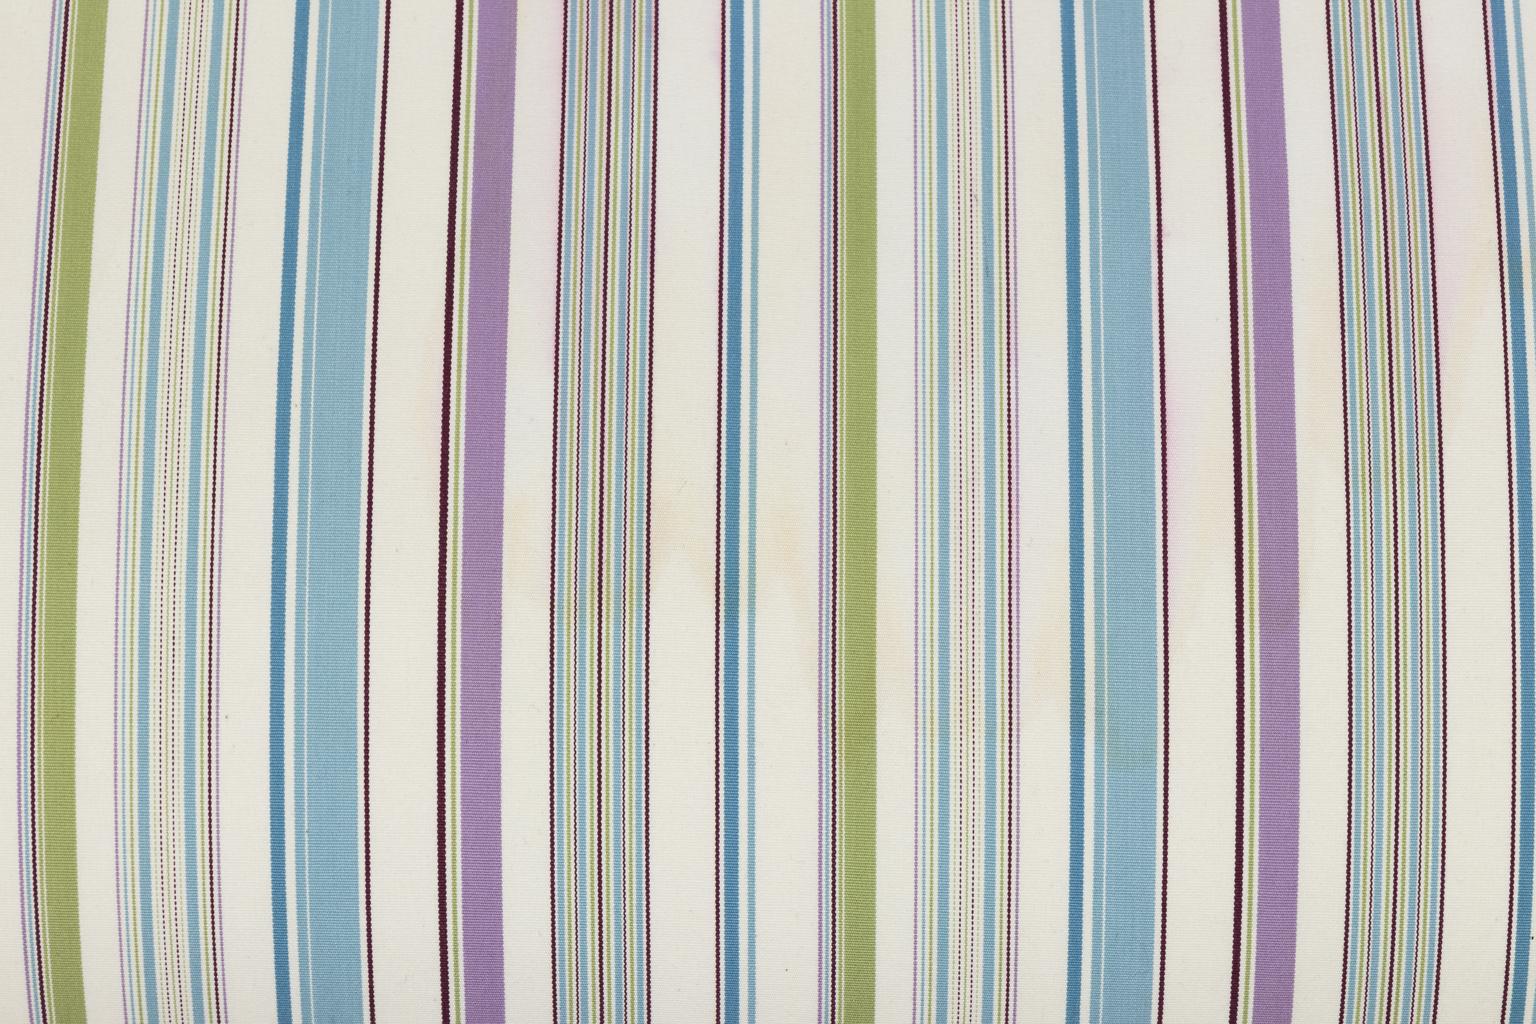 Louis XV style upholstered bench with soft blue, purple and green striped cotton fabric, circa 20th century. The bench also features gimp trim and turned legs.
     